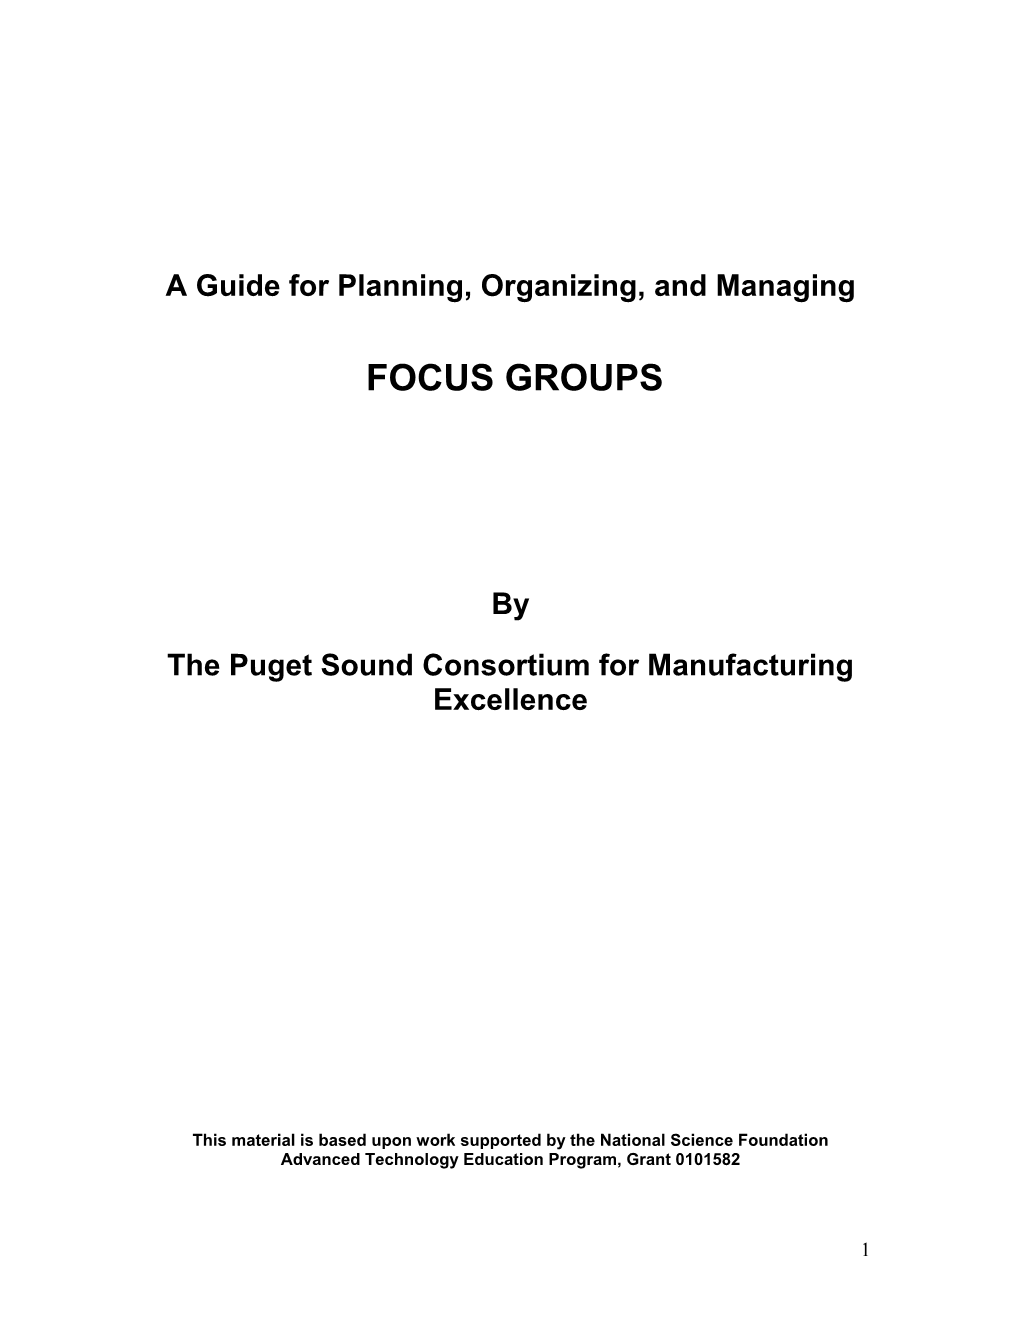 A Guide for Planning, Organizing, and Managing Focus Groups